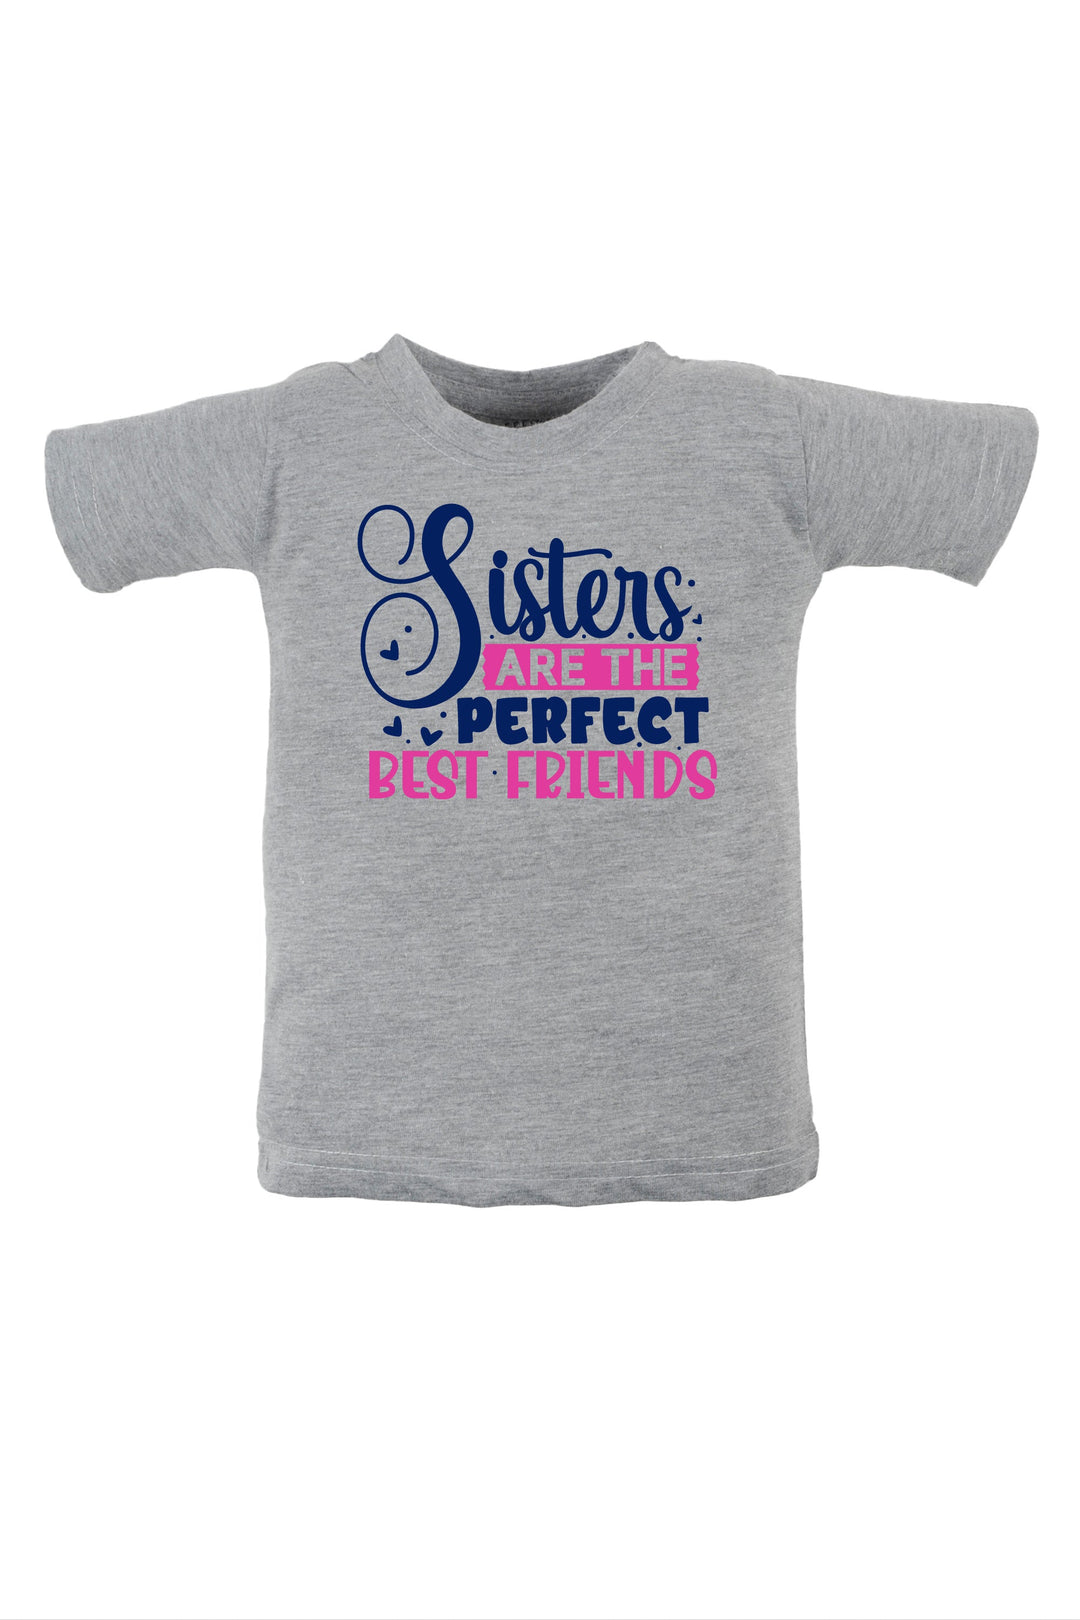 Sisters Are The Perfect Best Friends KIDS T SHIRT